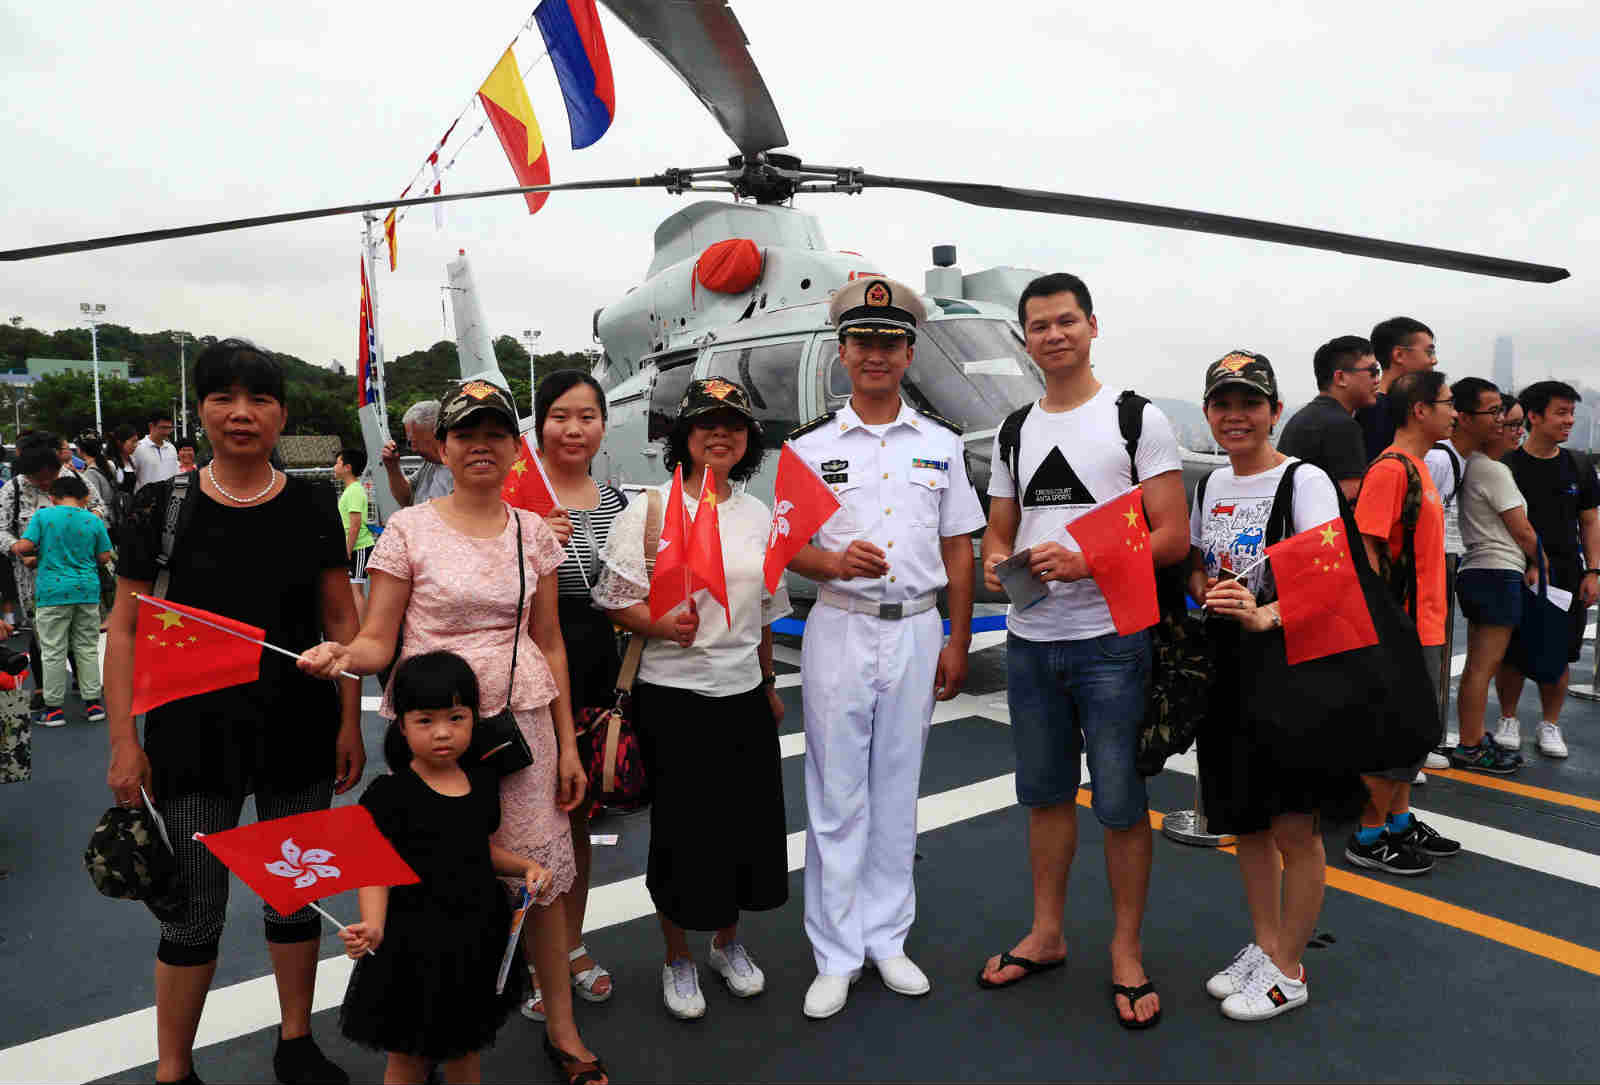 Local residents pose for group photo with a Chinese naval officer on the camp-open day in the Ngong Shuen Chau Barracks. In order to celebrate the 20th anniversary of Hong Kong's return to the motherland, the Ngong Shuen Chau Barracks of the PLA Hong Kong Garrison held the camp-open day activities on the morning of July 8, 2017. (eng.chinamil.com.cn/Photo by Zhou Hanqing)